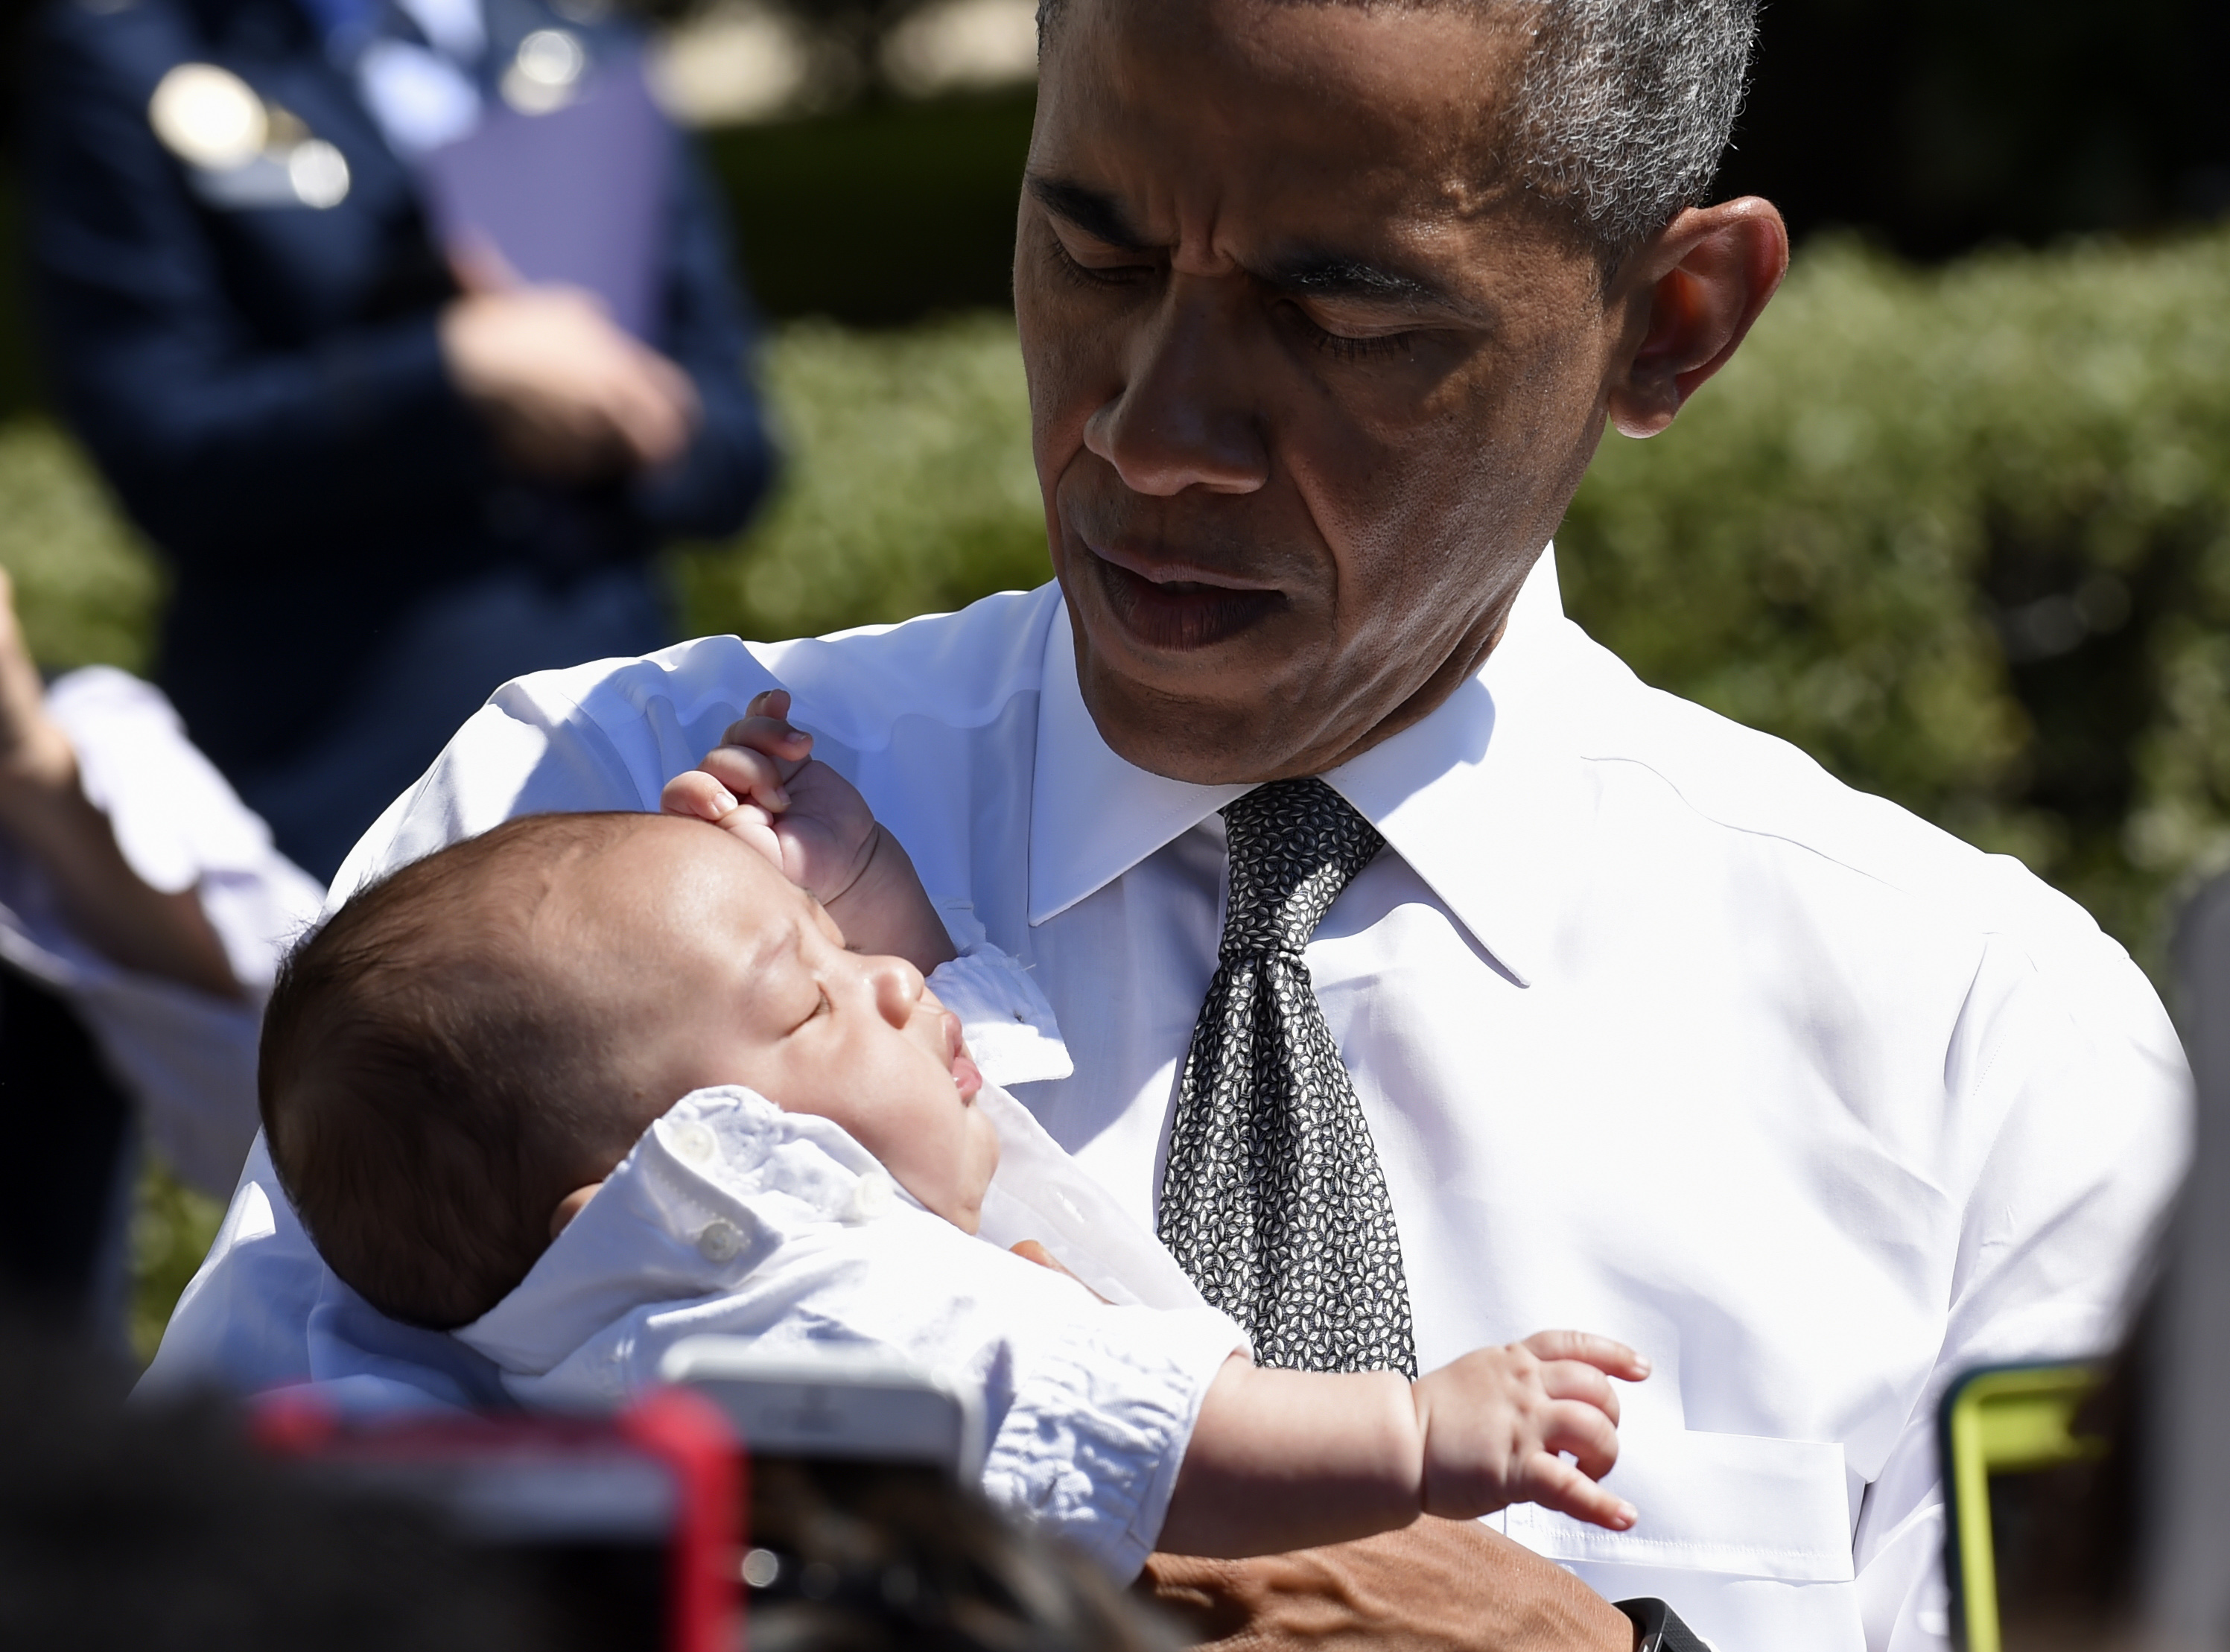 President Barack Obama holds a baby as he greets guests attending an event at the White House in Washington on April 16, 2015. (Susan Walsh&mdash;AP)